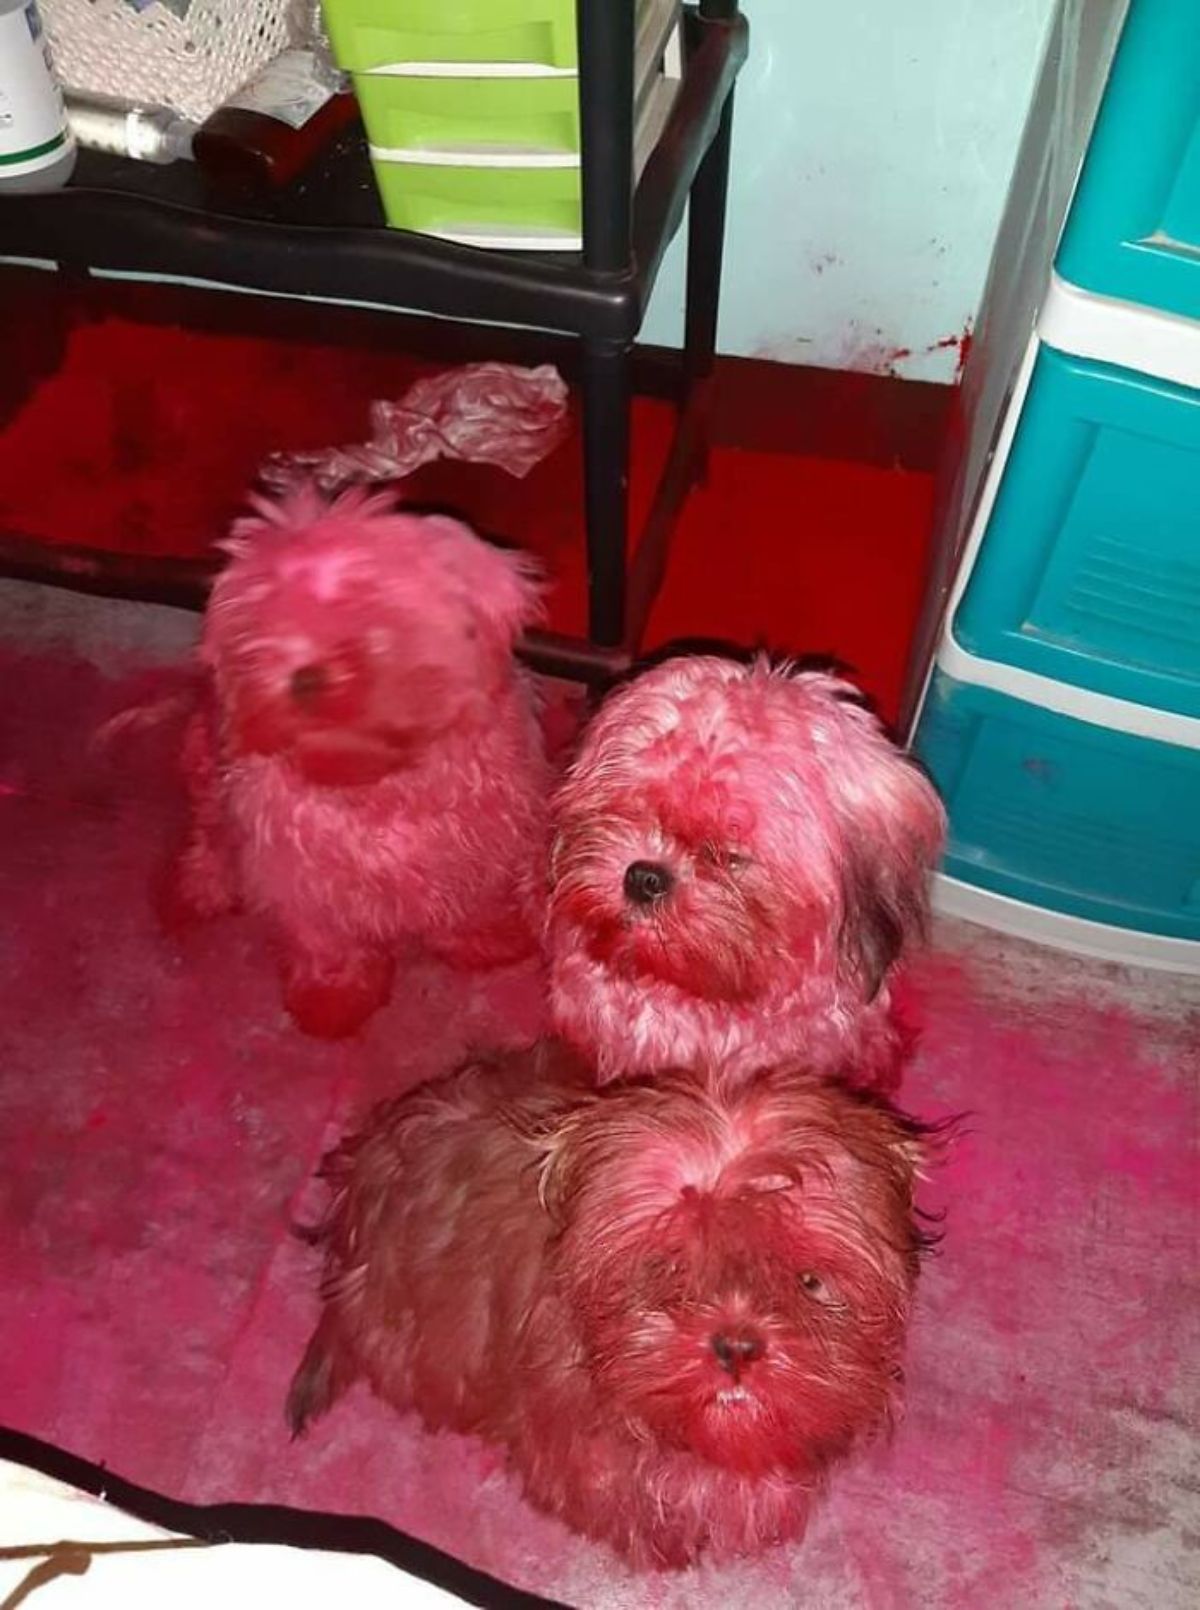 3 small fluffy dogs covered in red colouring with the floor red as well